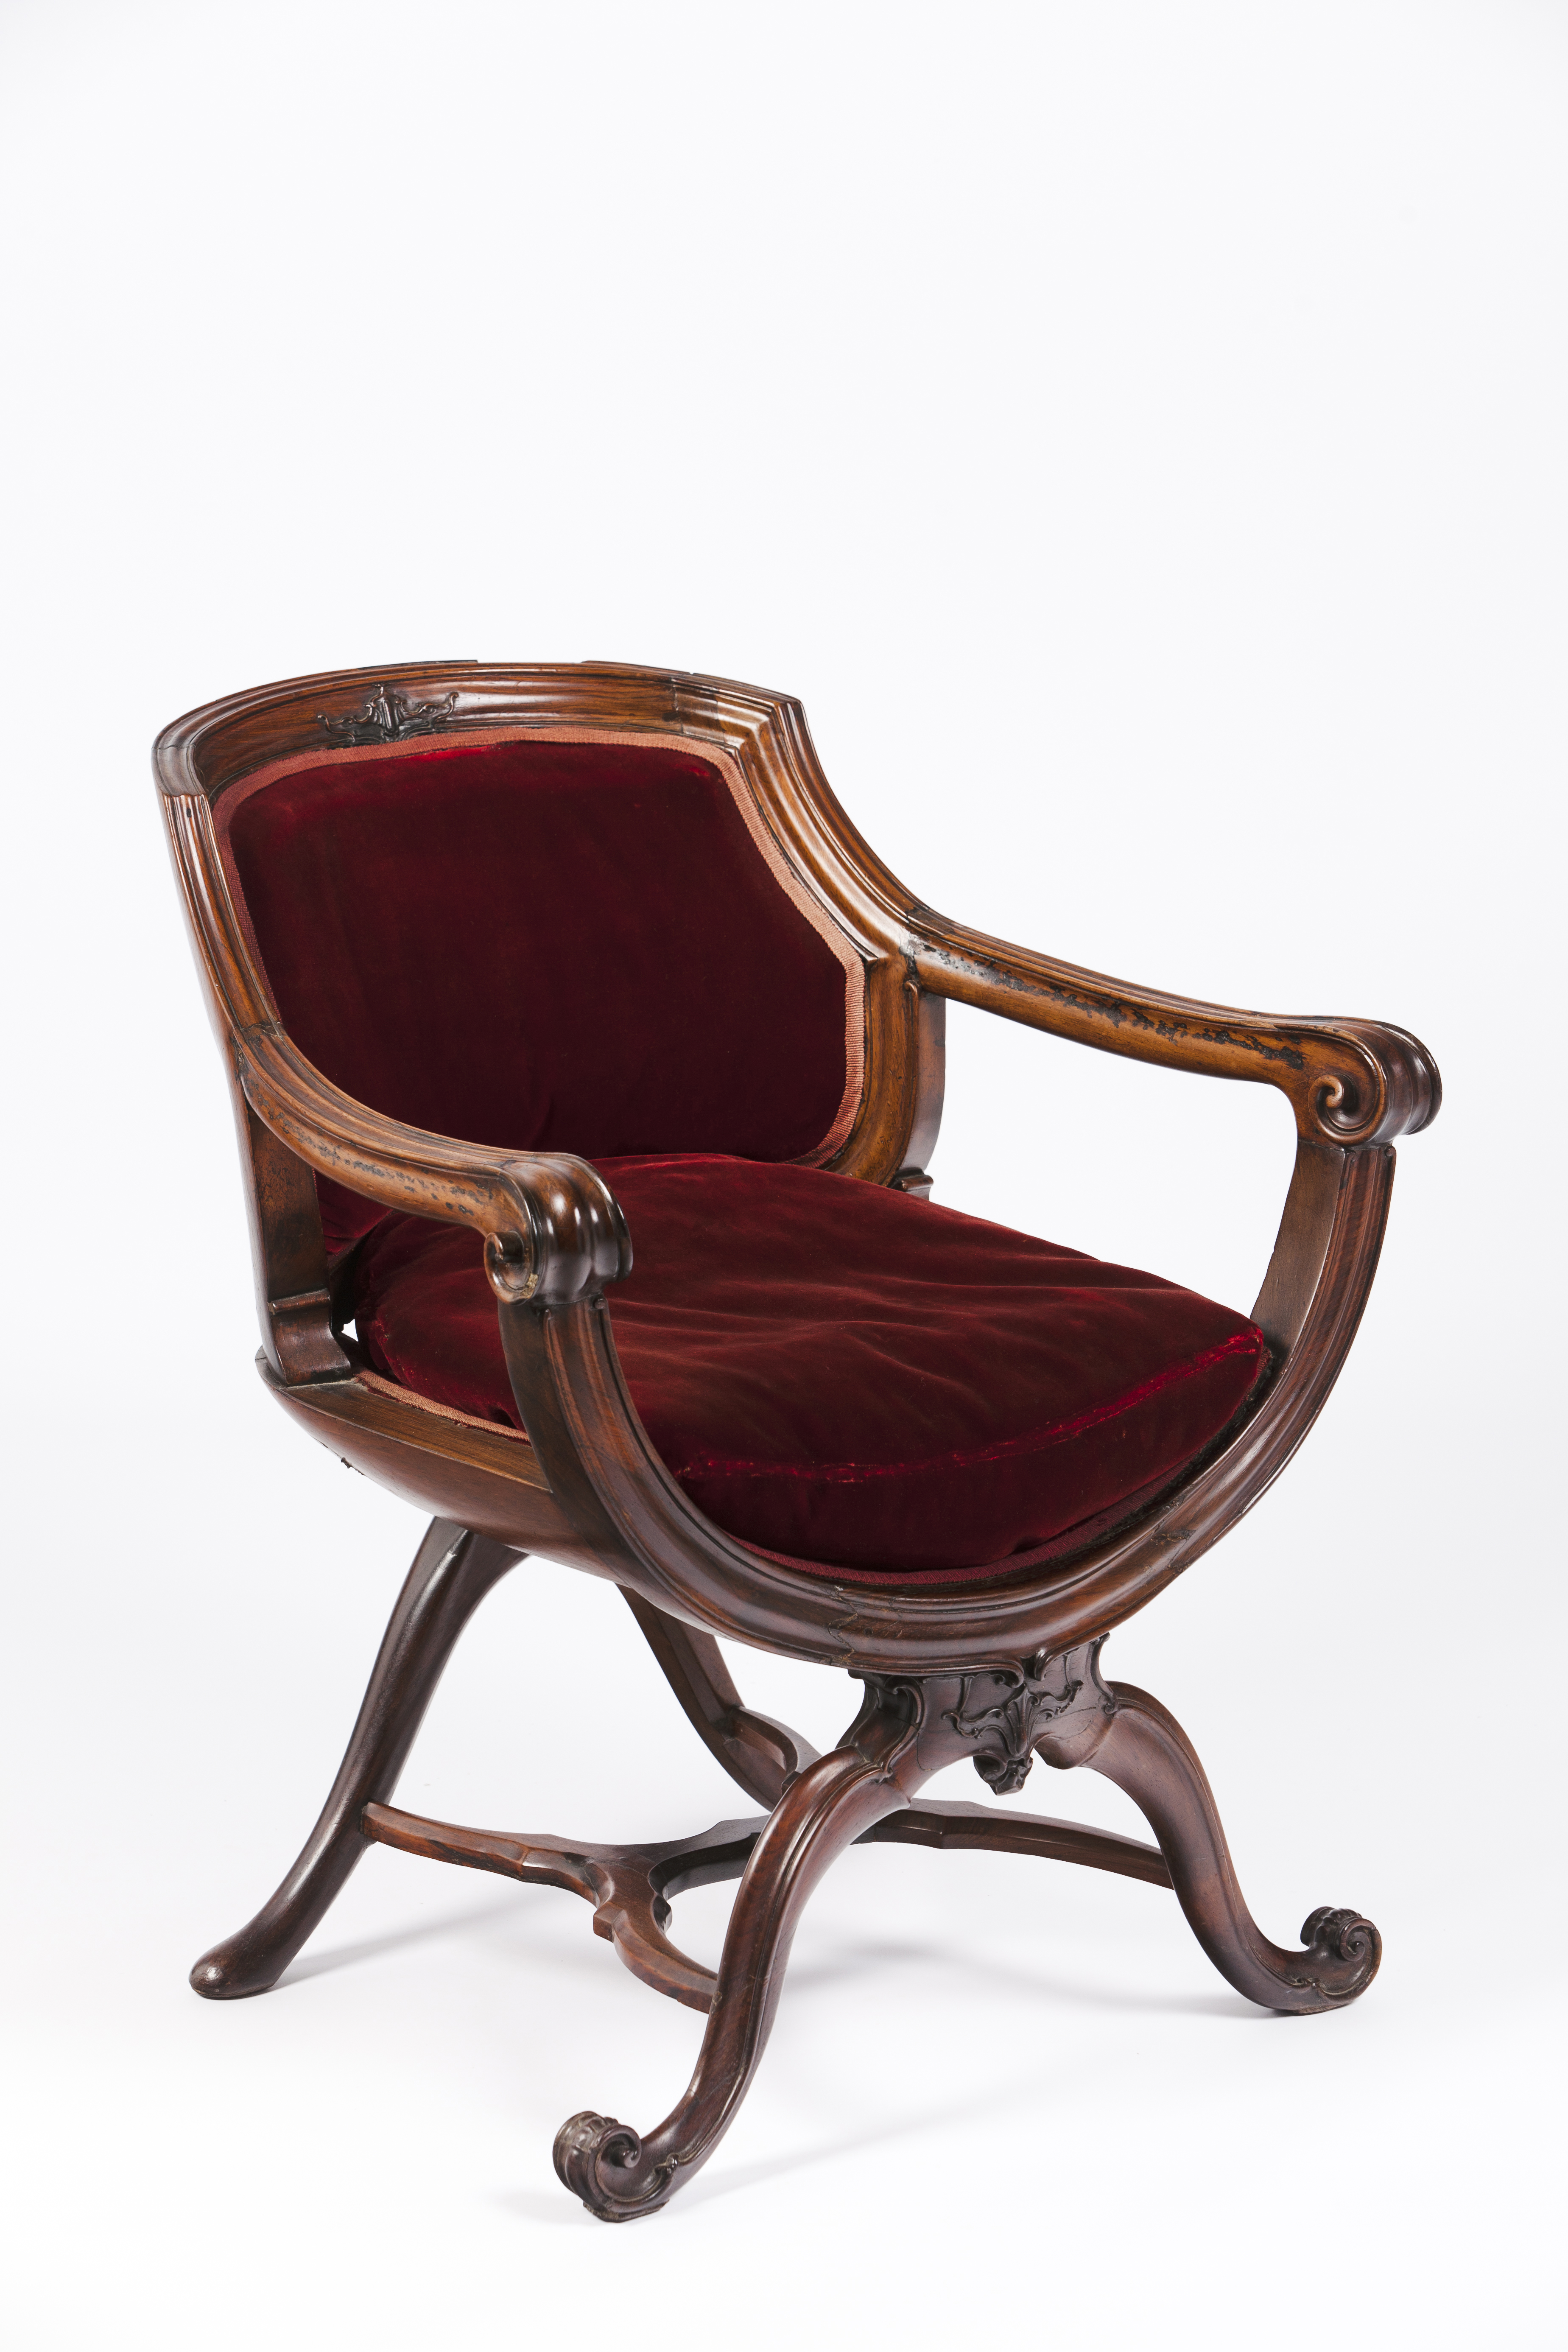 A D.José armchairRosewood Velvet upholstery Portugal, 18th century (restoration and minor faults)